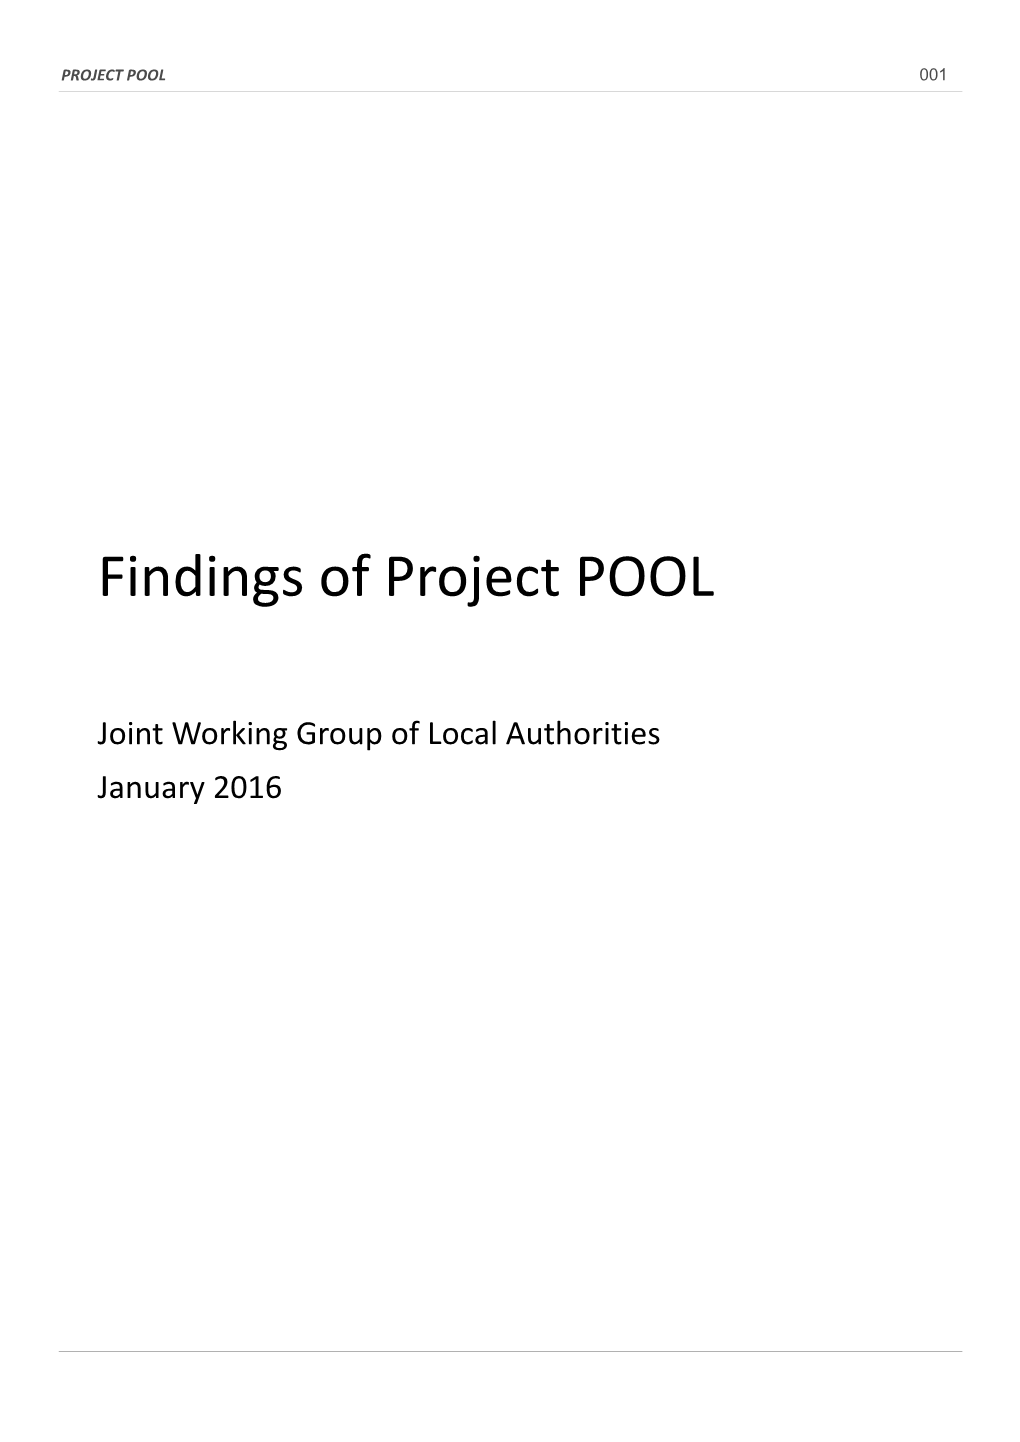 Findings of Project POOL